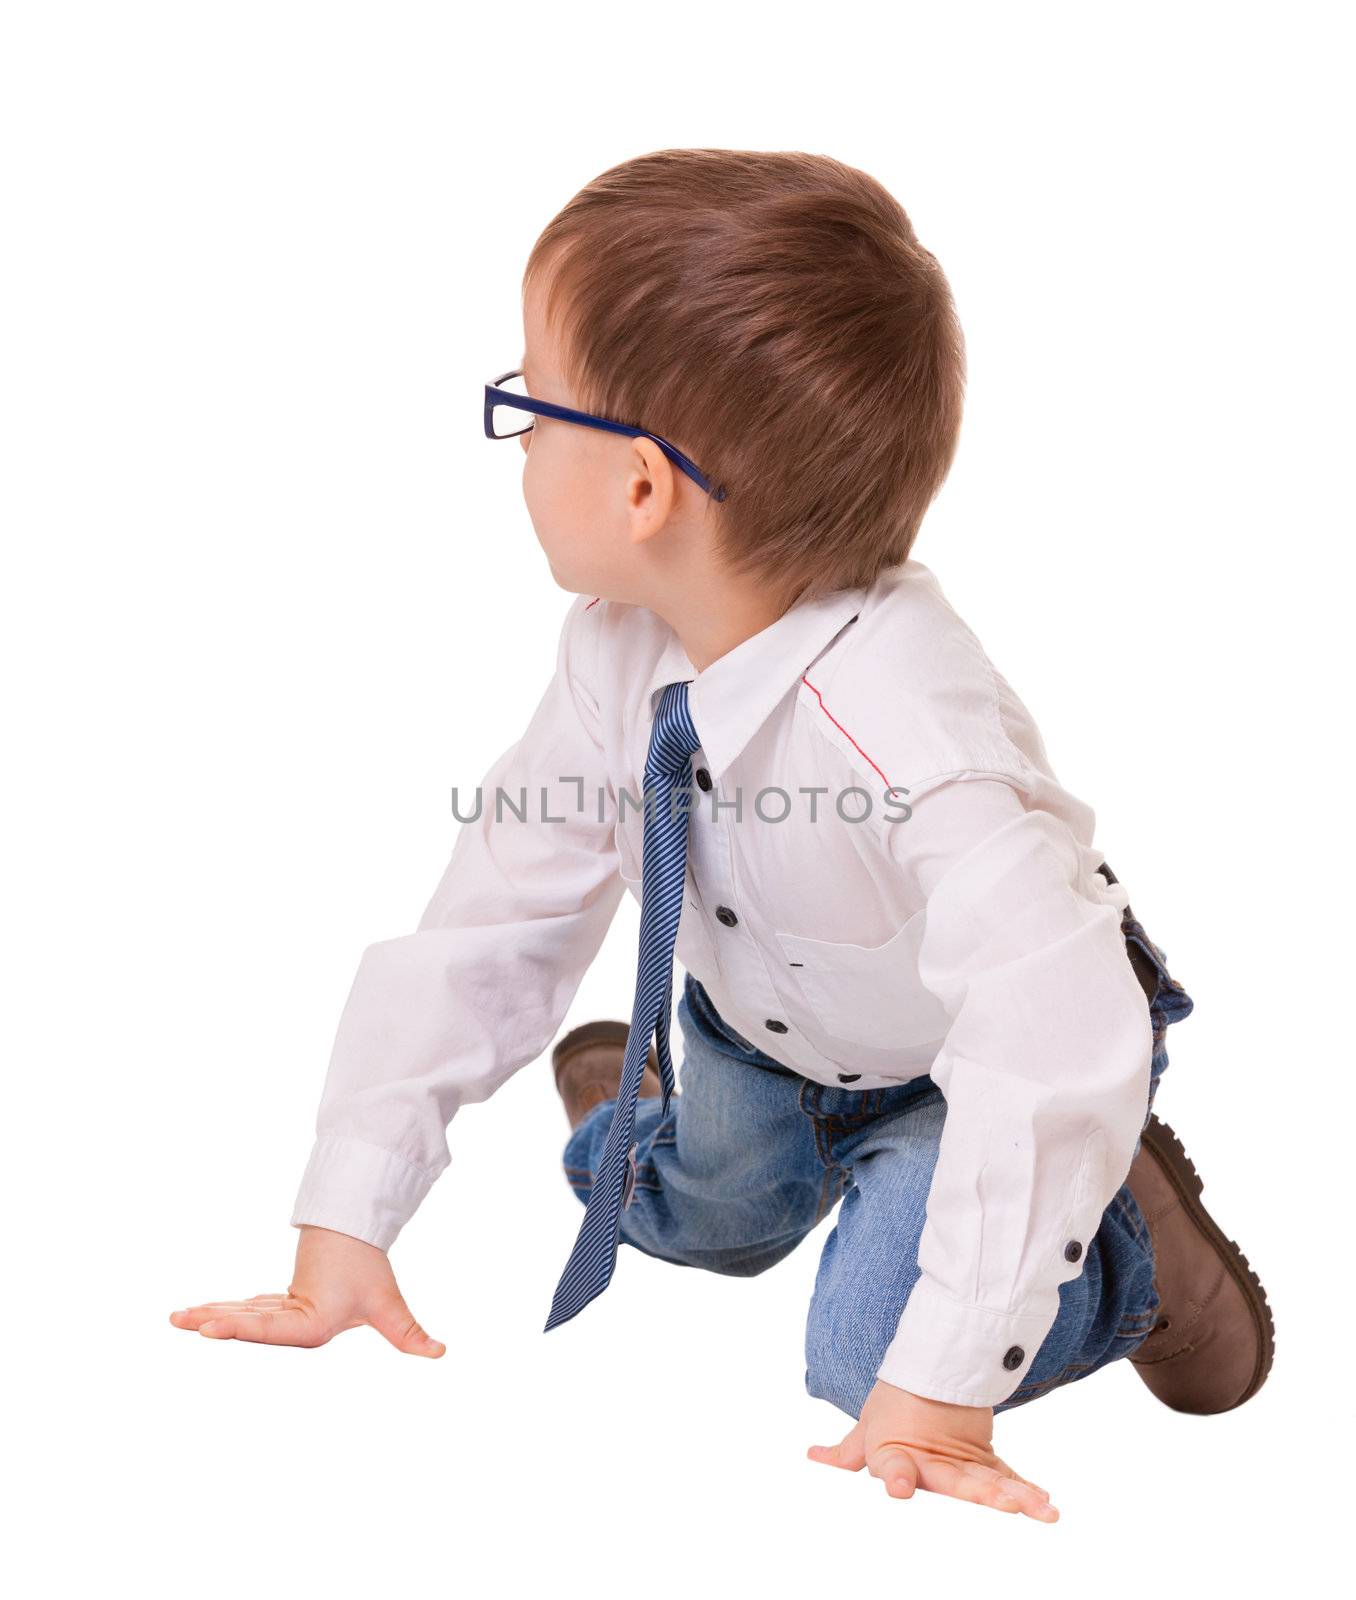 Small clever boy escape by crawling away isolated on white background